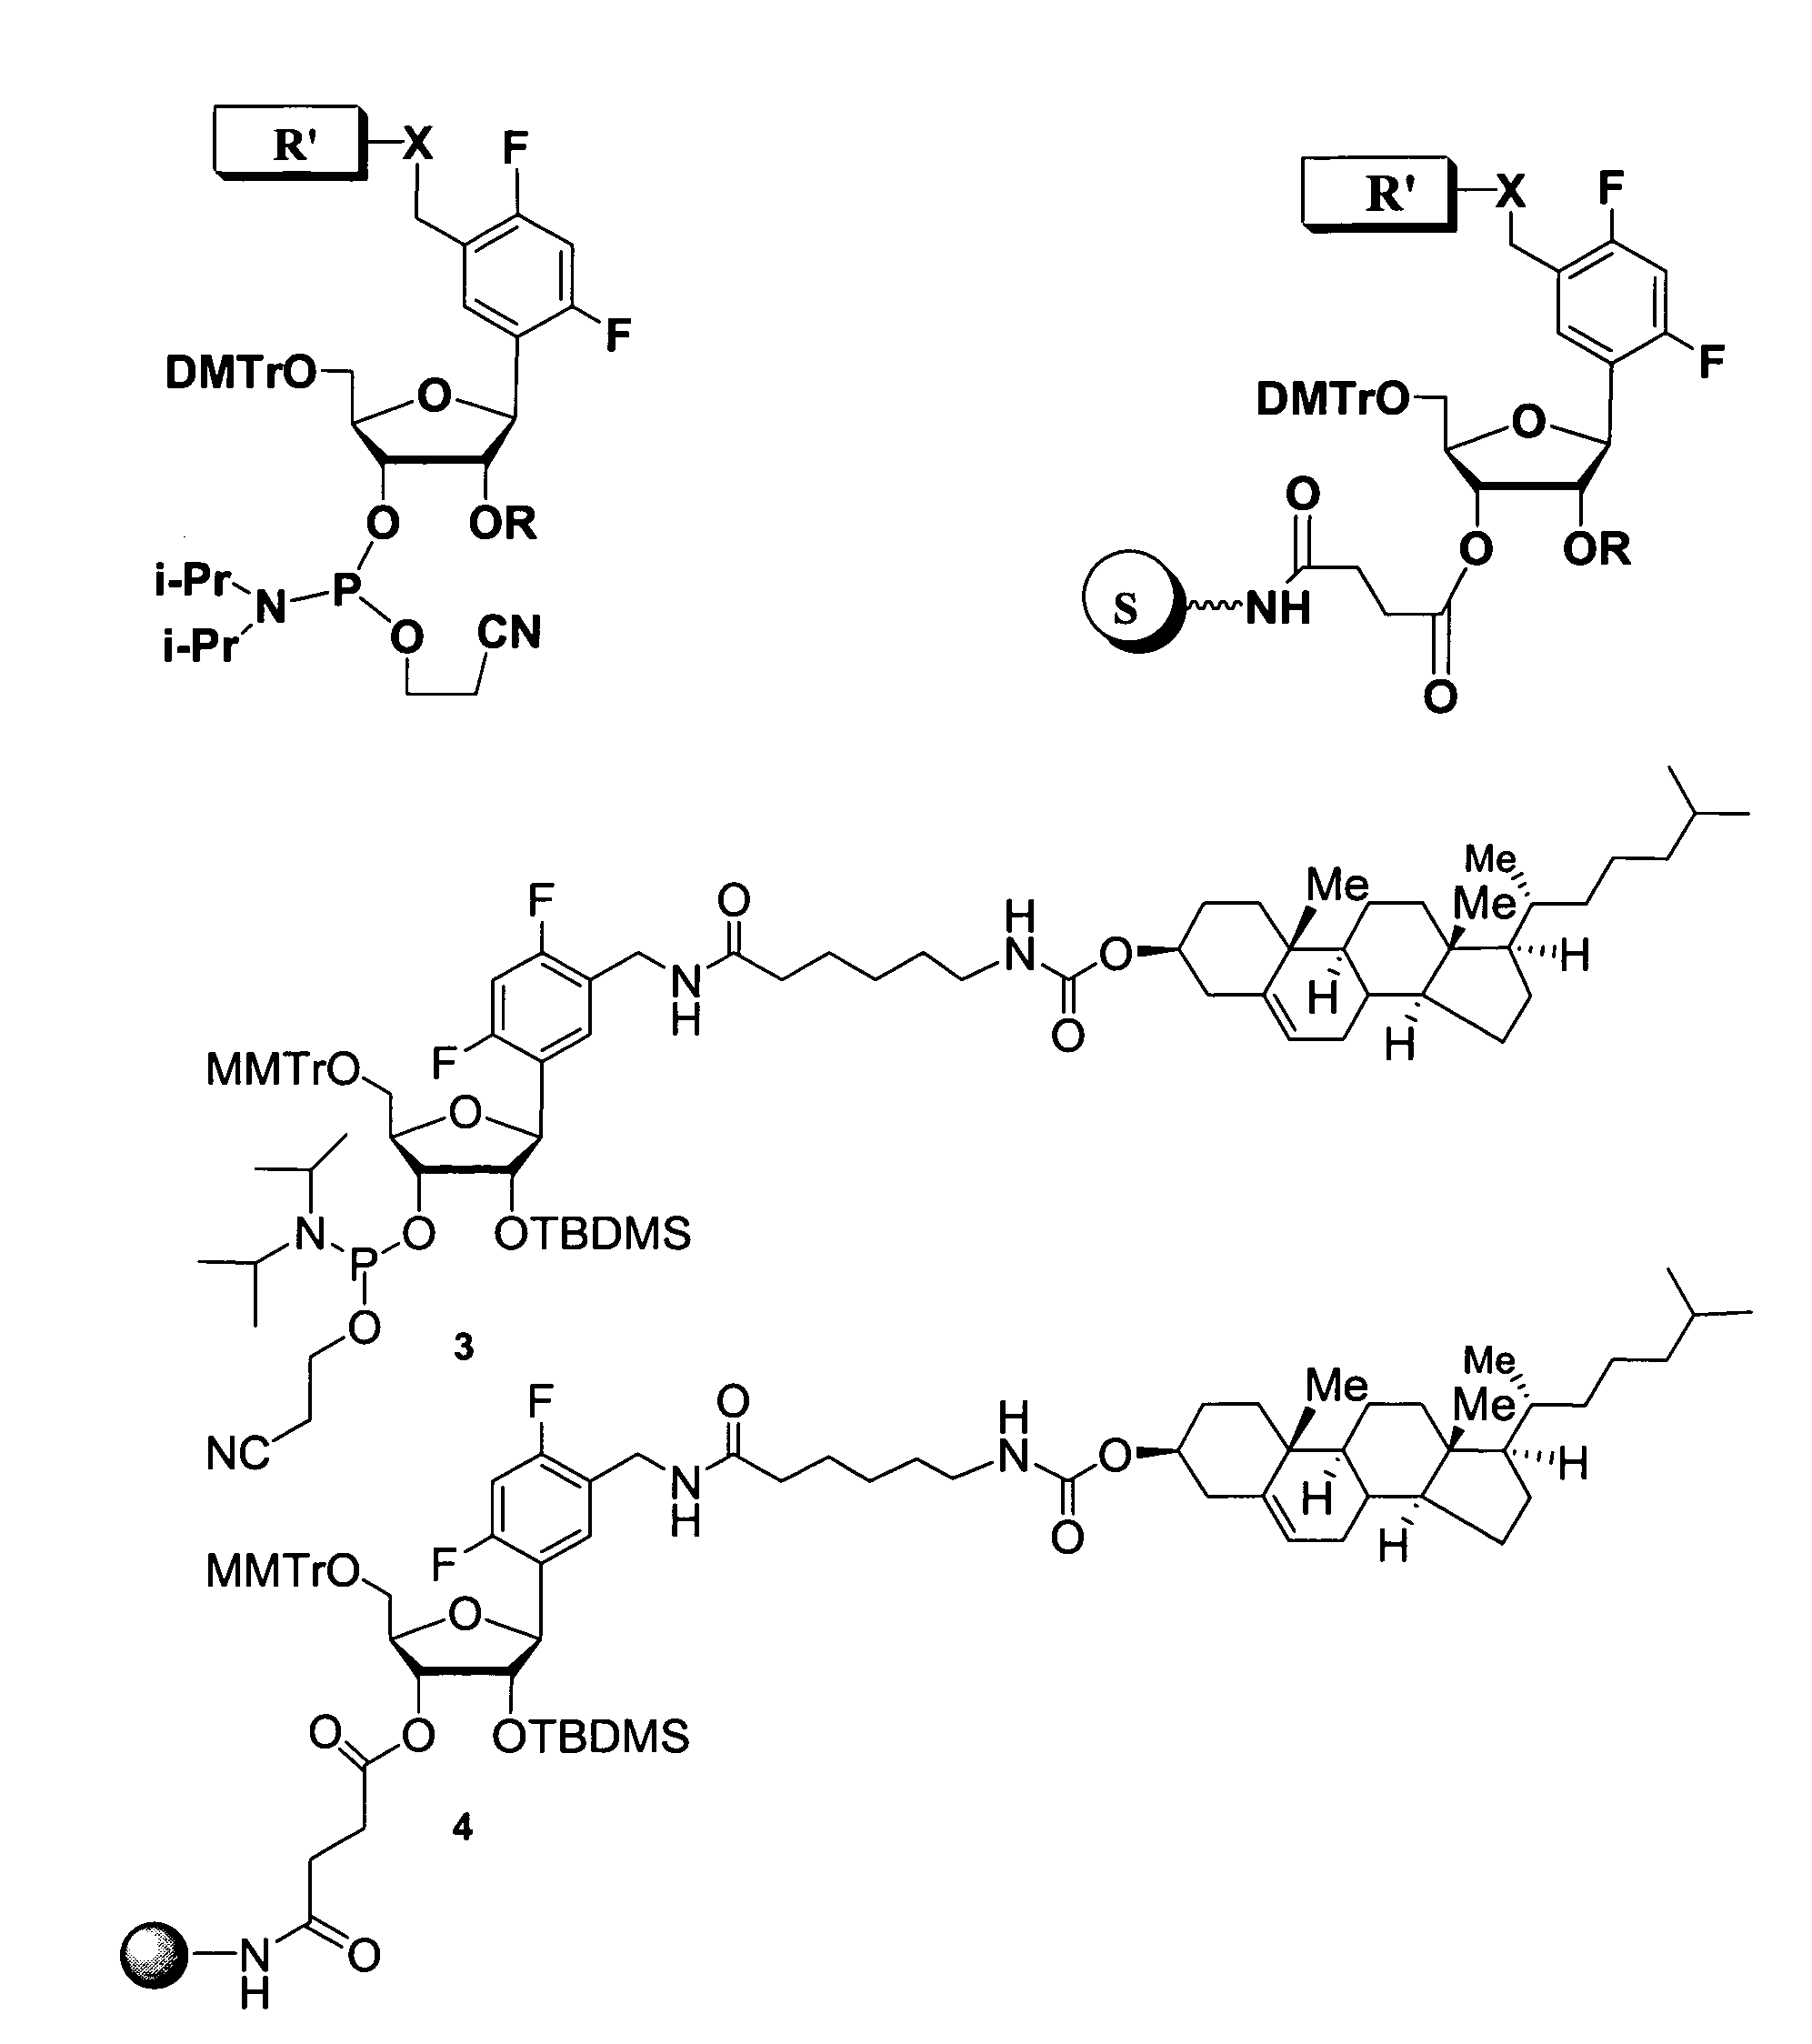 Oligonucleotides comprising a ligand tethered to a modified or non-natural nucleobase